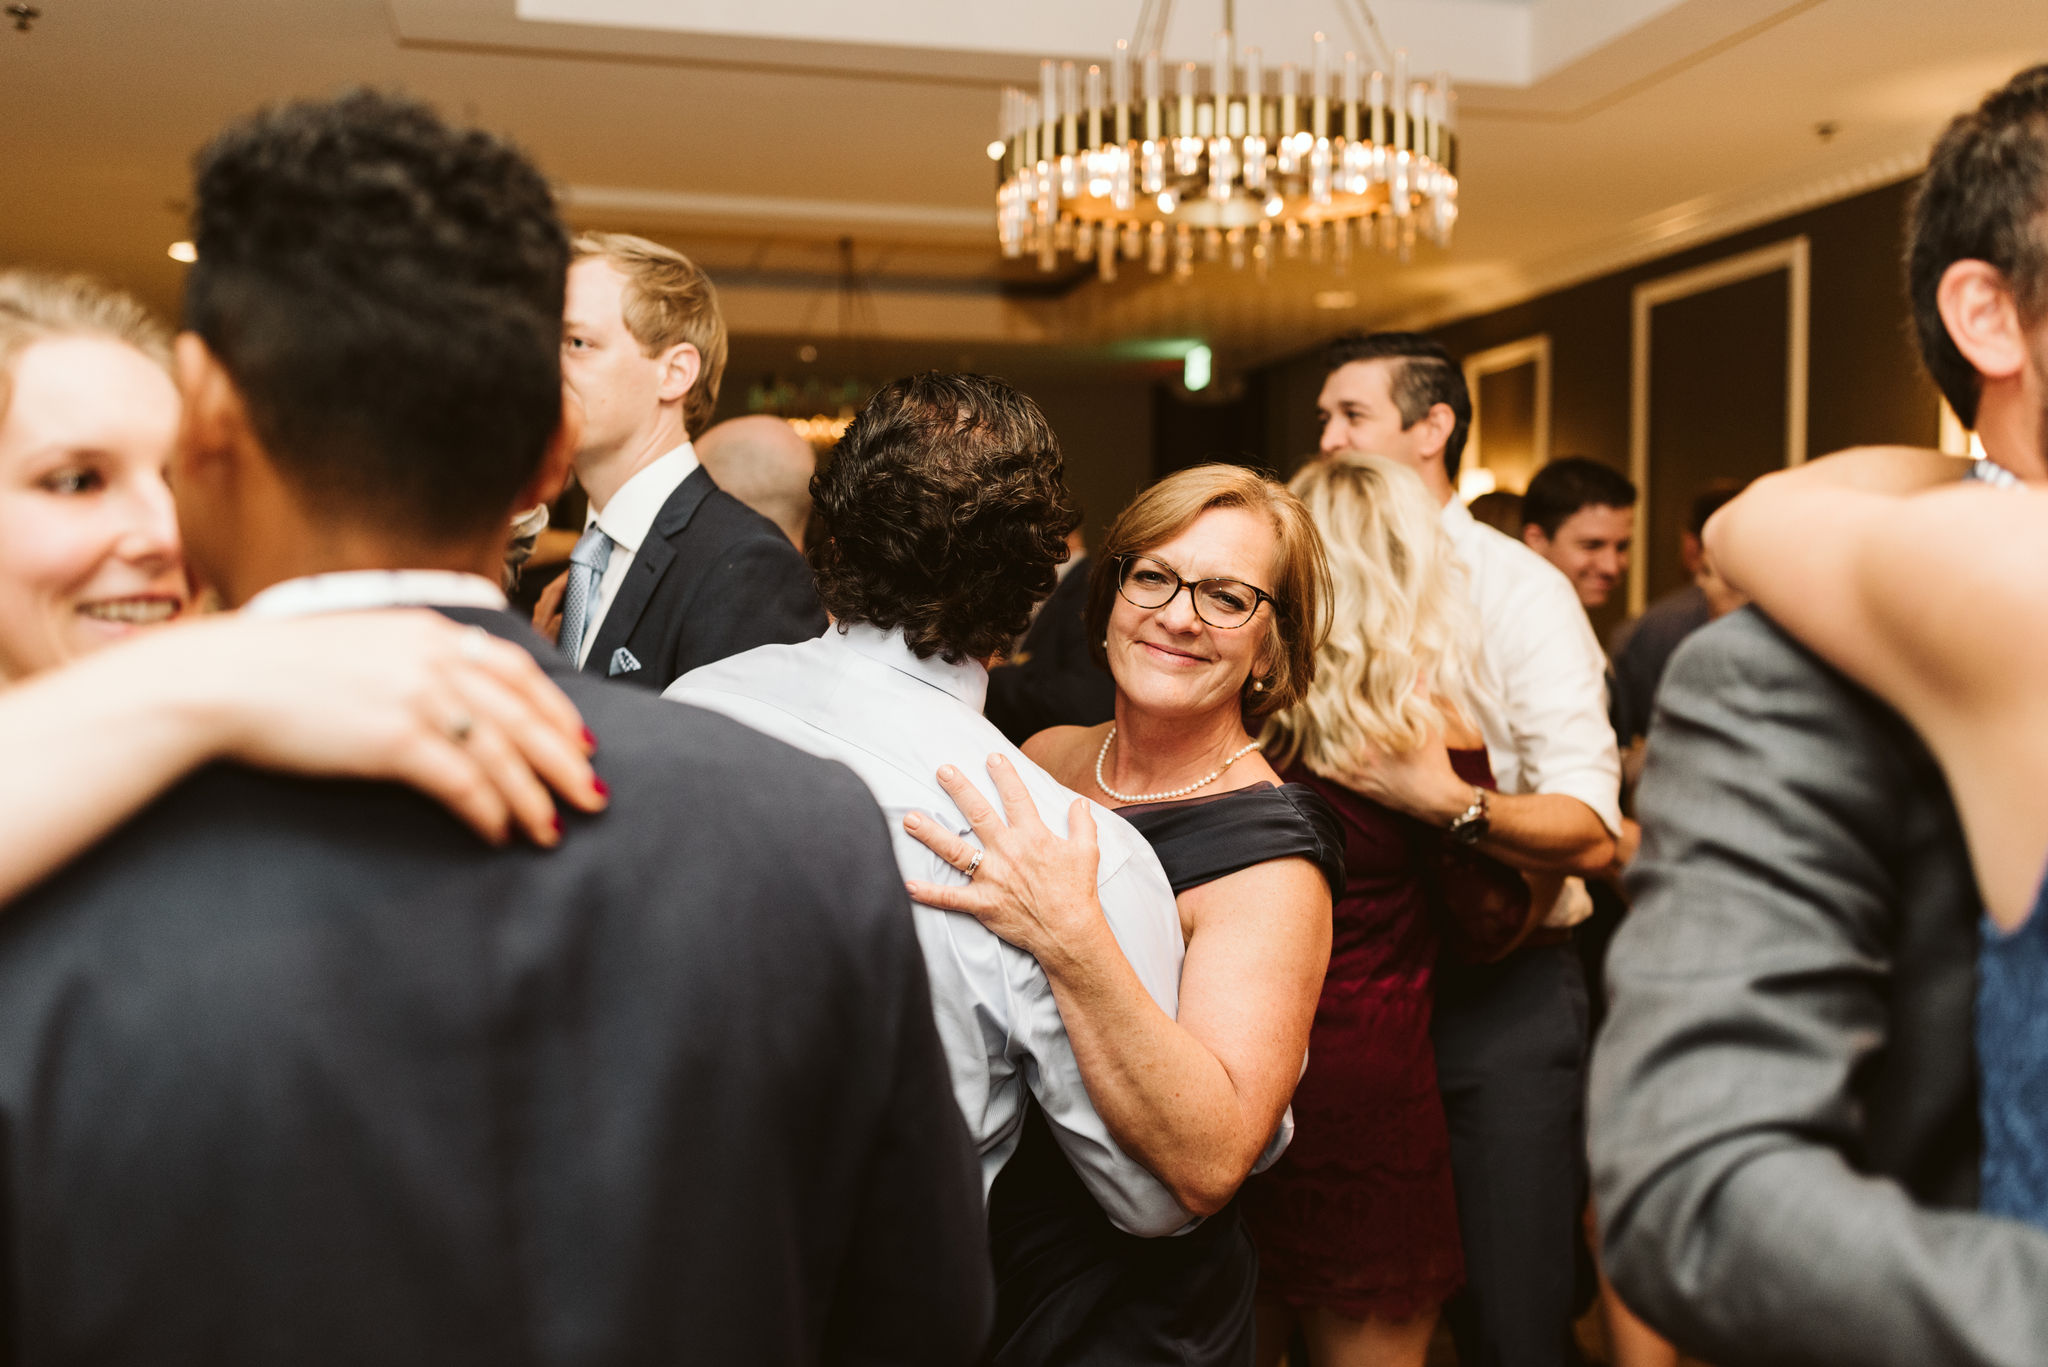  Phoenix Maryland, Baltimore Wedding Photographer, Eagle’s Nest Country Club, Classic, Romantic, Wedding Guests Smiling and Dancing at Reception 